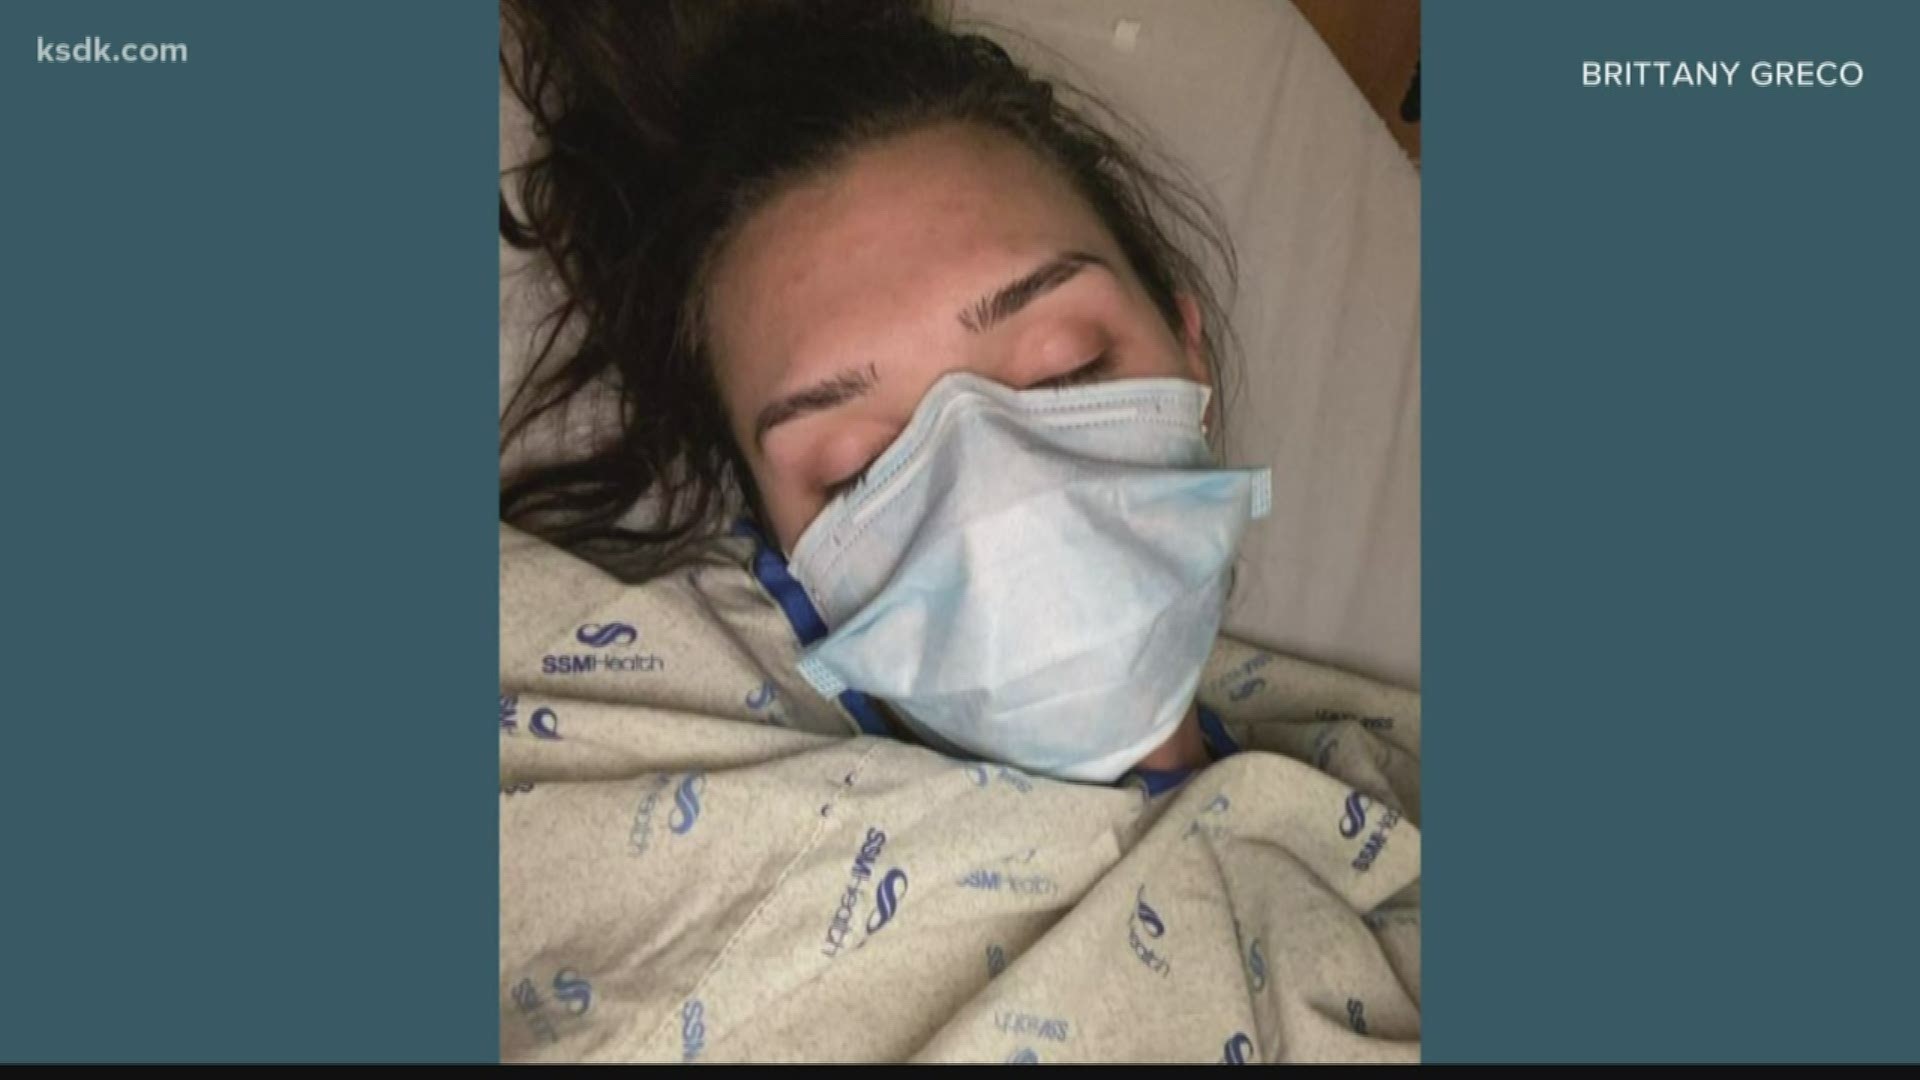 A young St. Charles mother wants her 'terrifying' case of the coronavirus to convince others to stay home